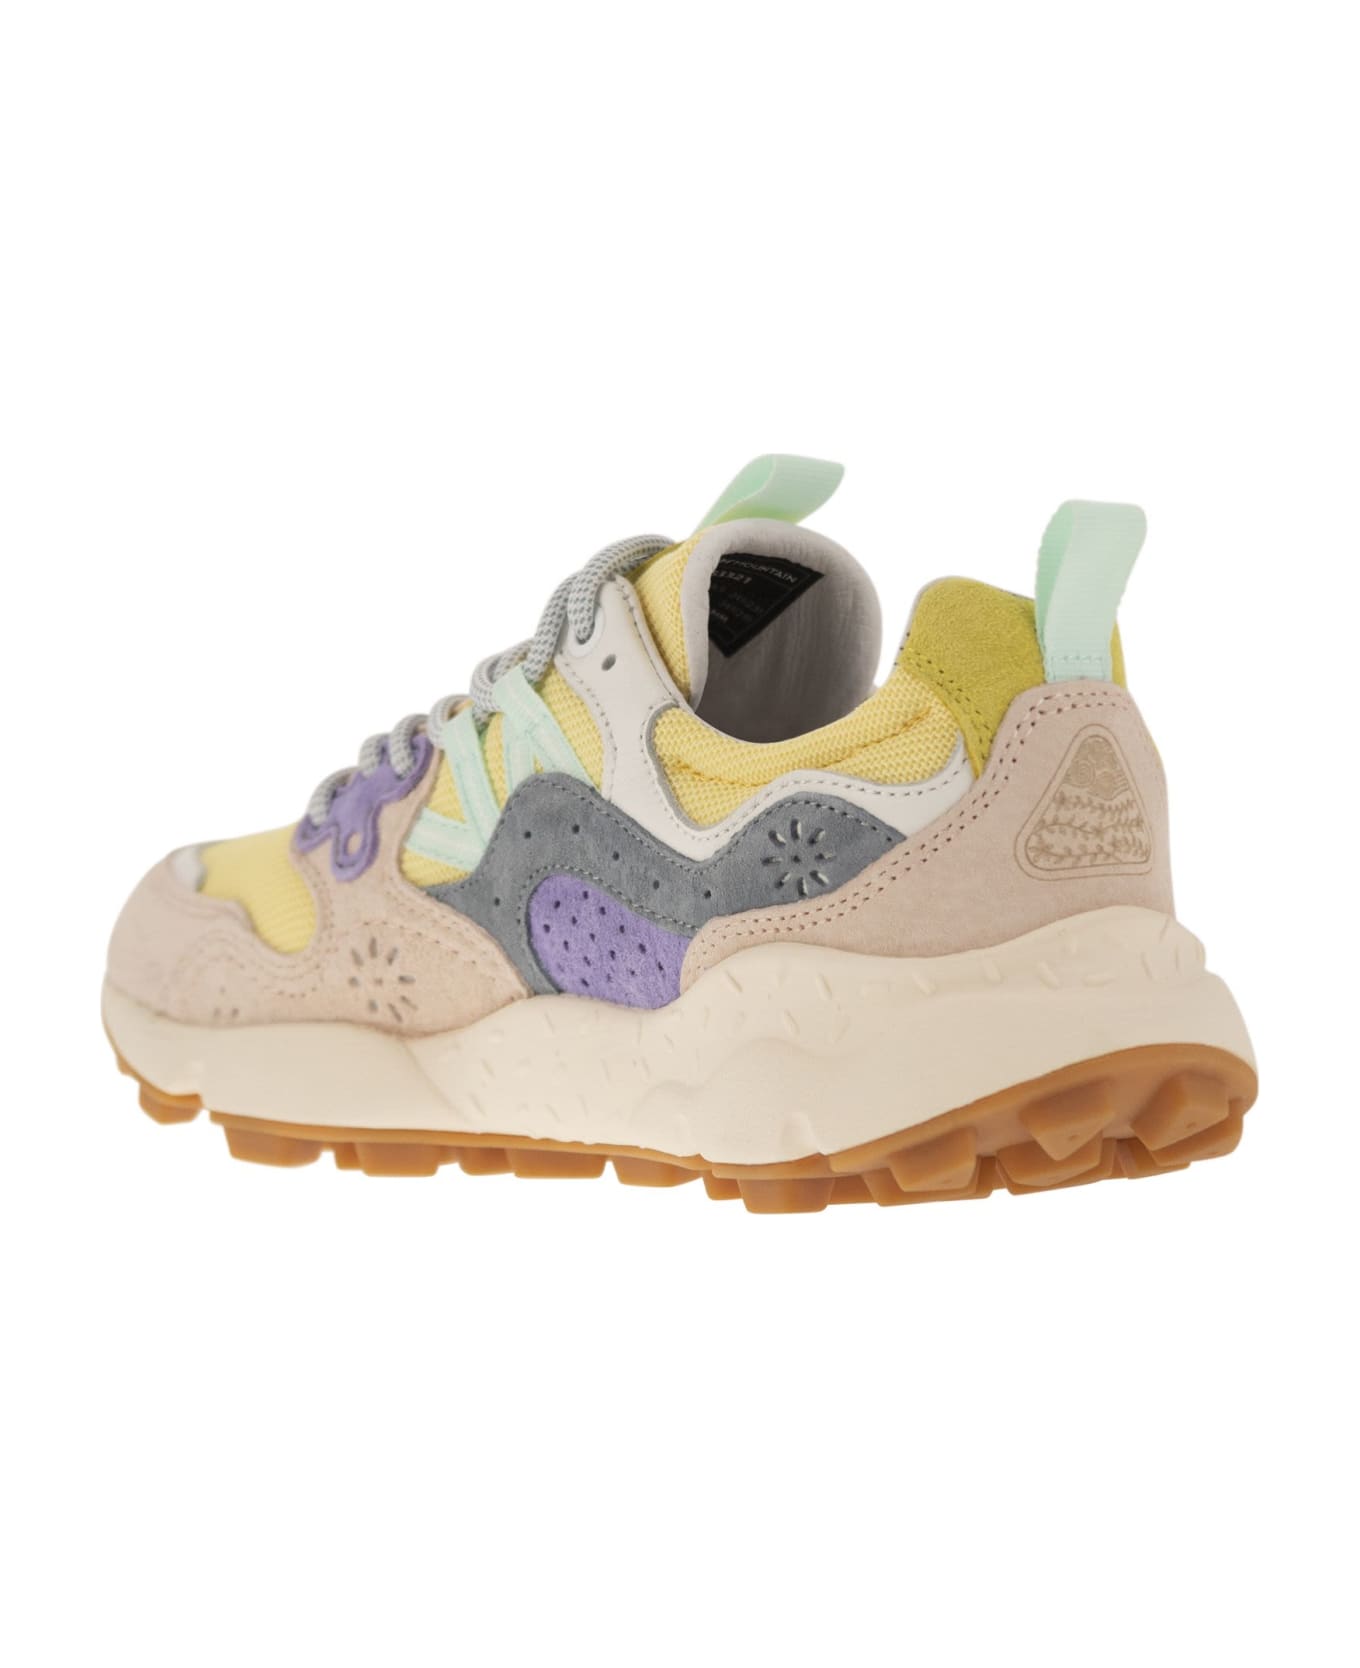 Flower Mountain Yamano 3 - Sneakers - Pink